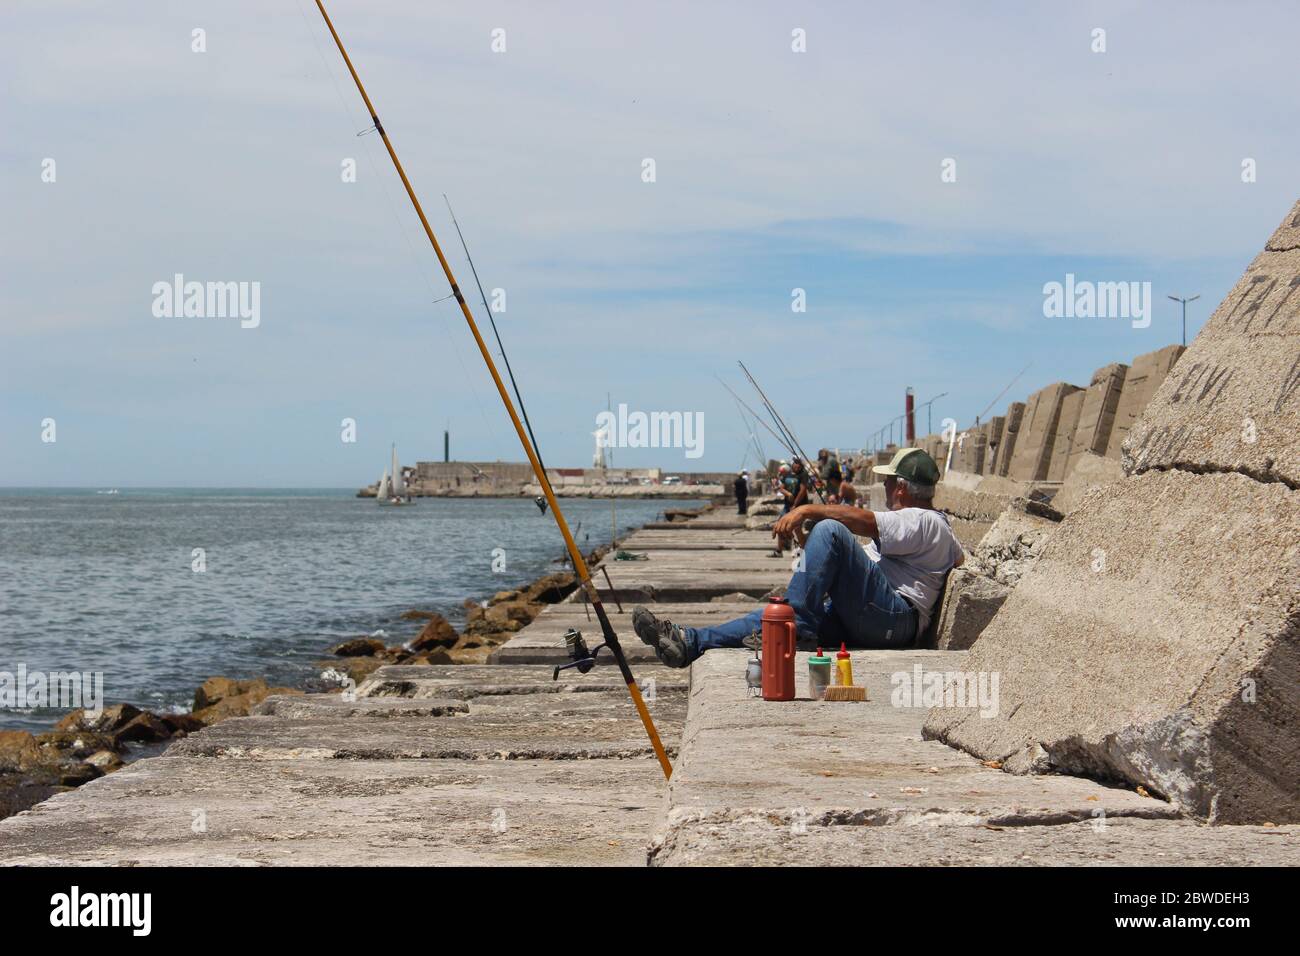 fishermen resting on the coast with Mate (Argentinean Tea) next to some stanks at the front and on the background we can see the statue of christ on t Stock Photo